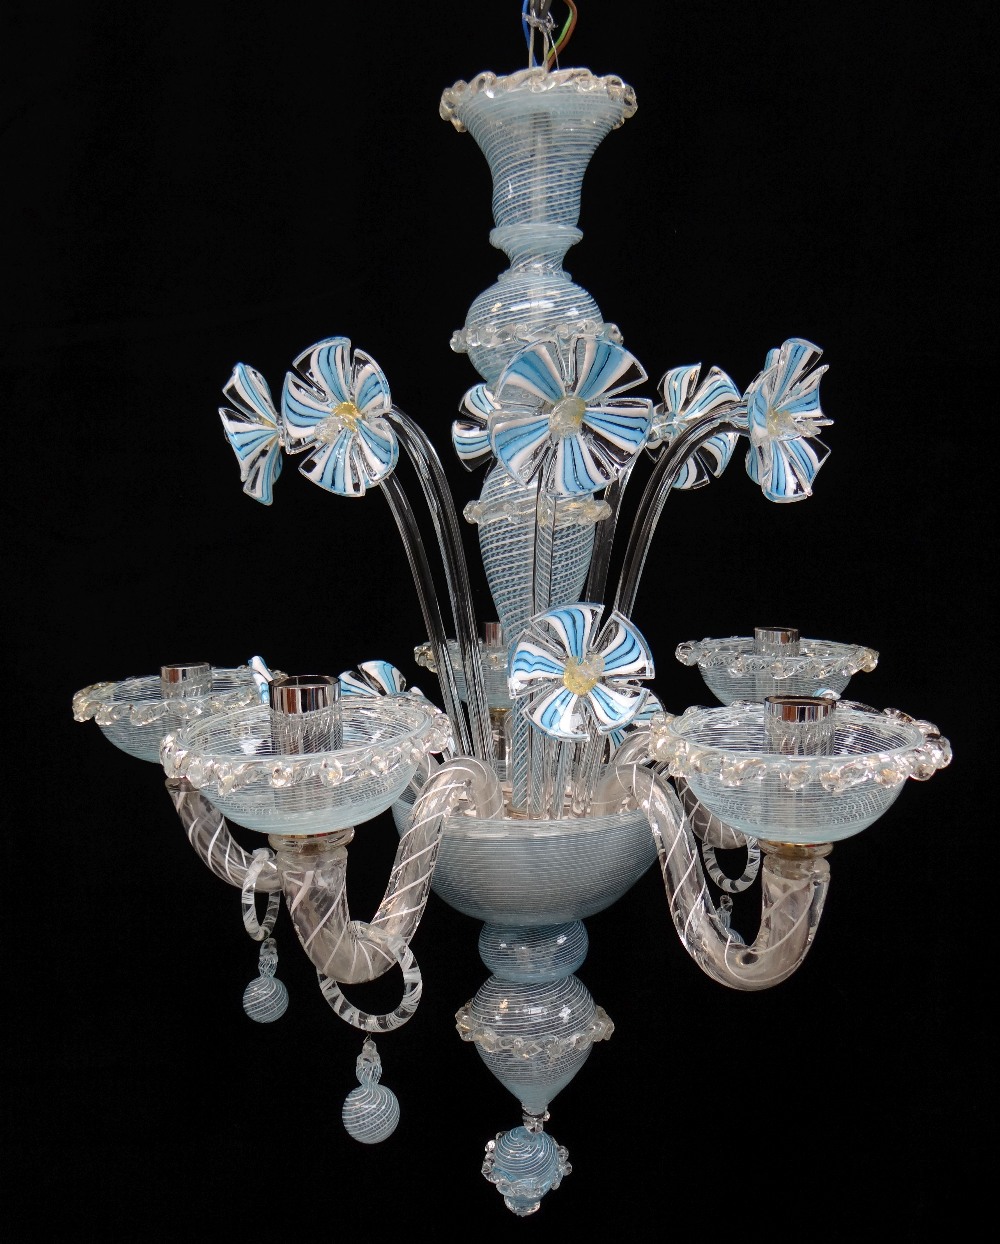 MODERN ITALIAN GLASS FIVE-LIGHT CHANDELIER, probably Murano, latticino blue and opaque white glass - Image 8 of 9